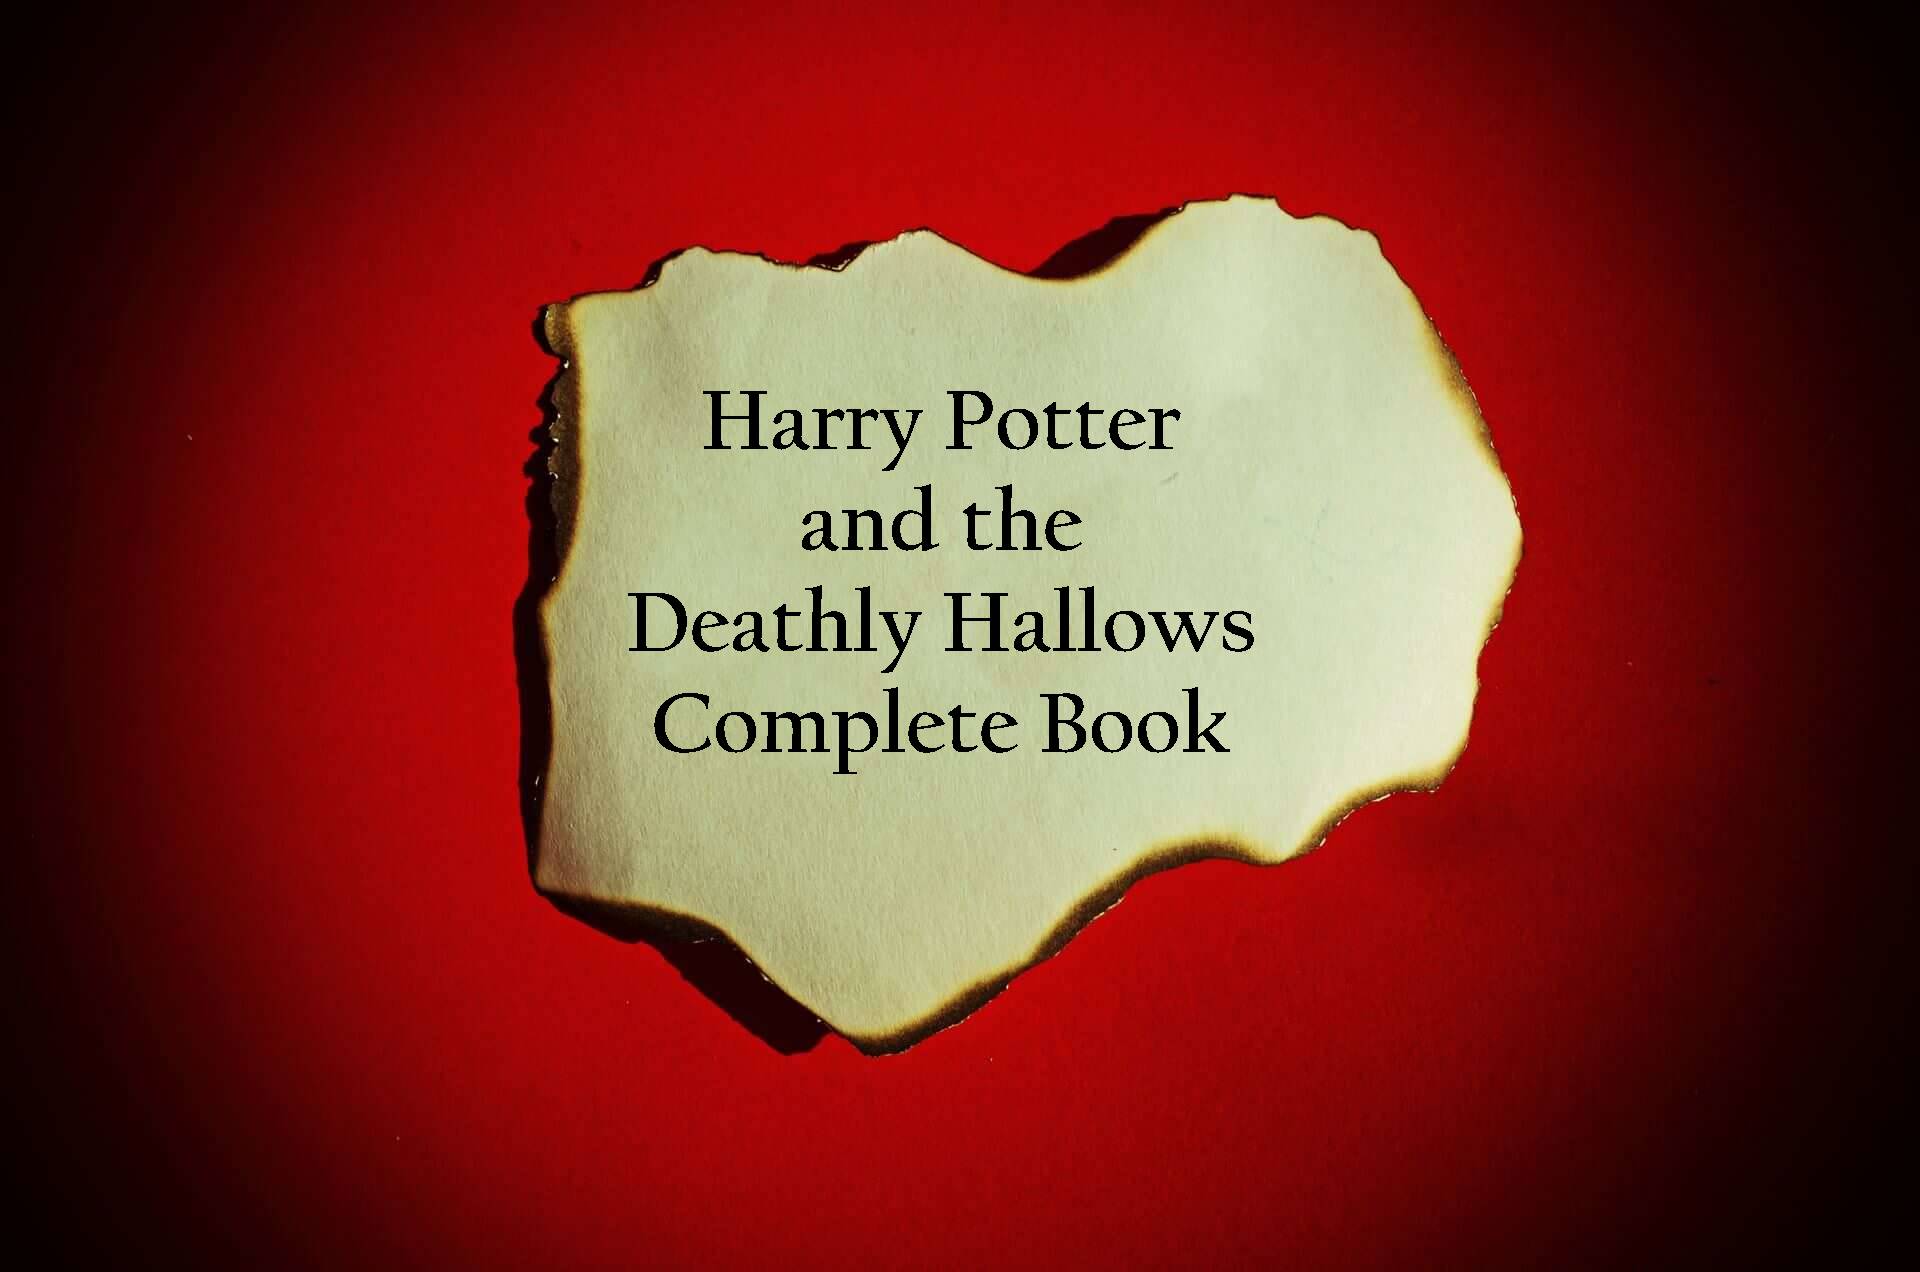 harry potter and the deathly hallows audiobook free download mp3